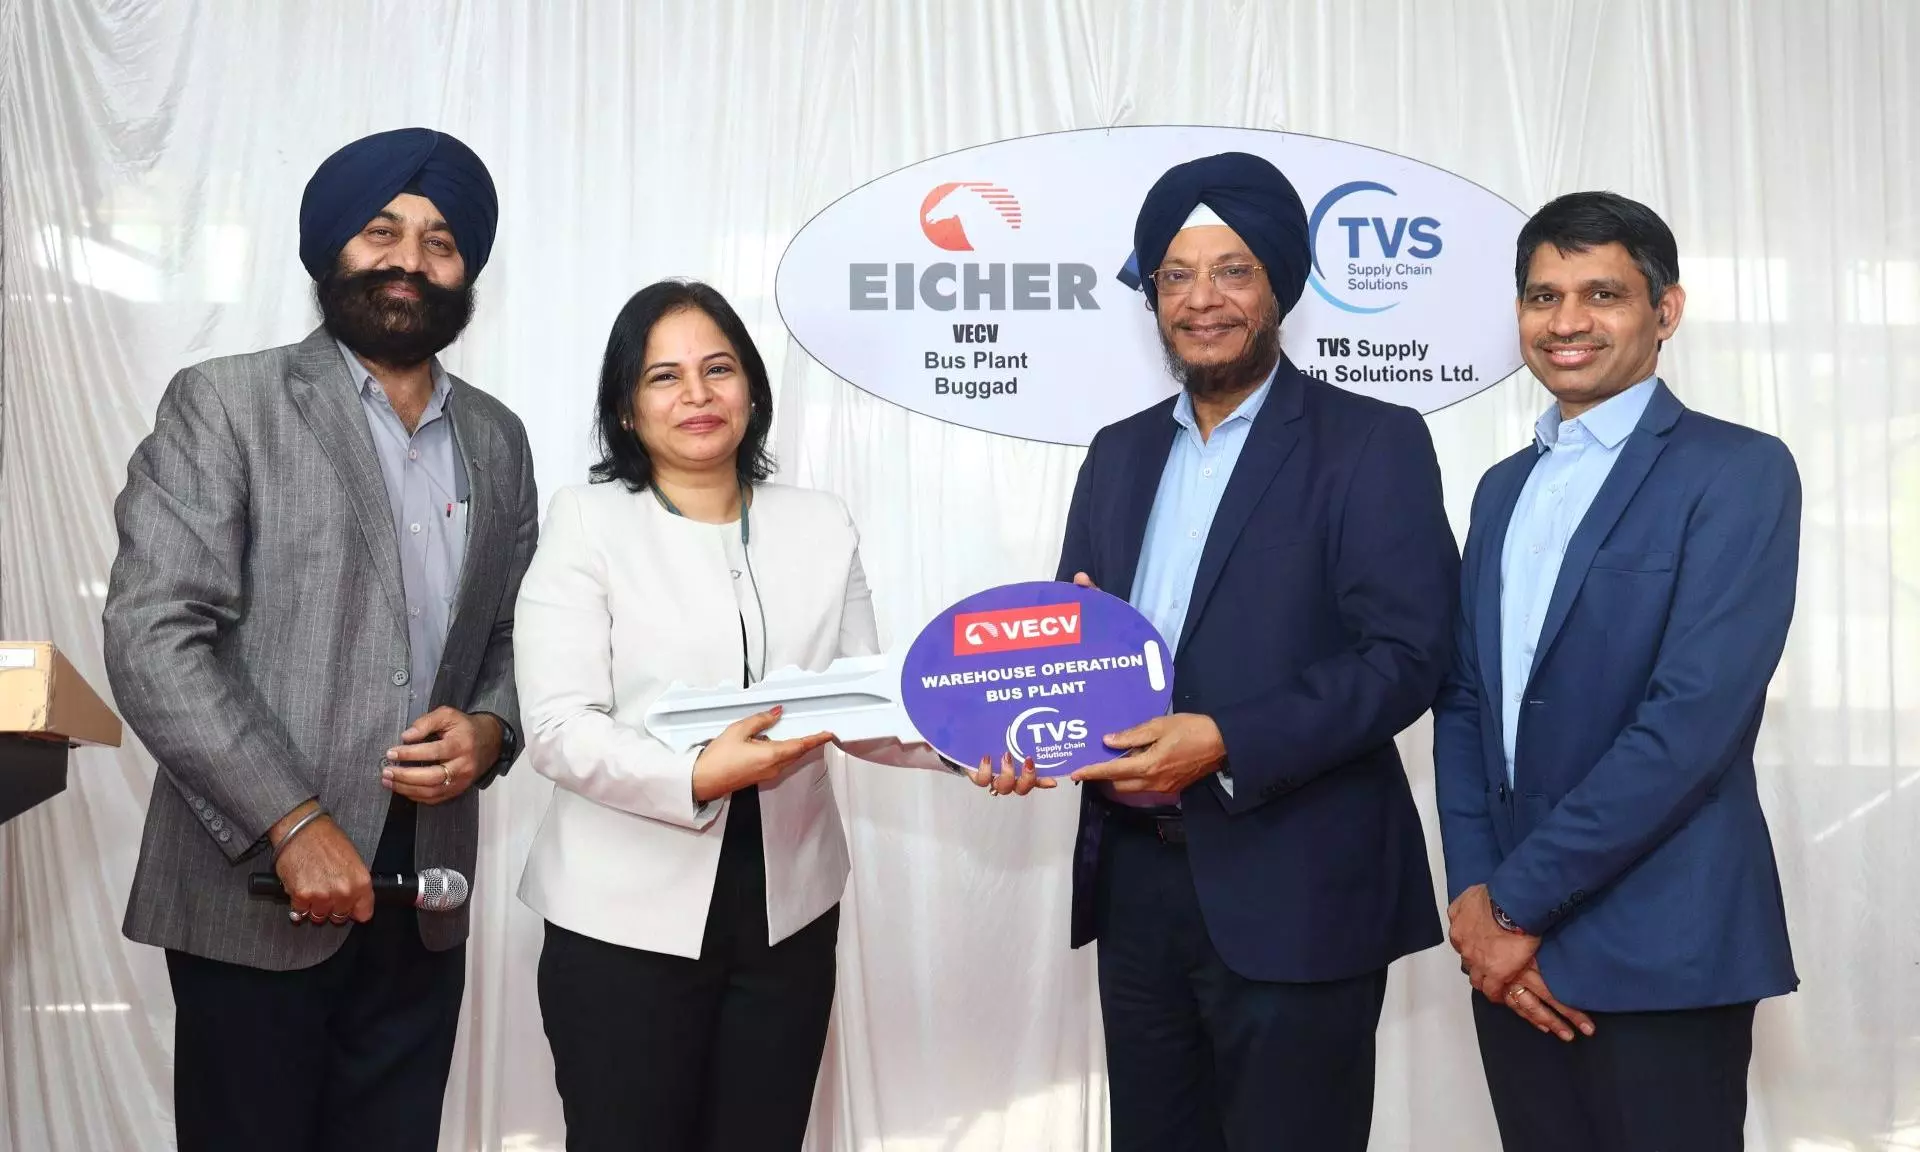 TVS SCS wins new logistics deal for Eicher’s bus facility in Baggad